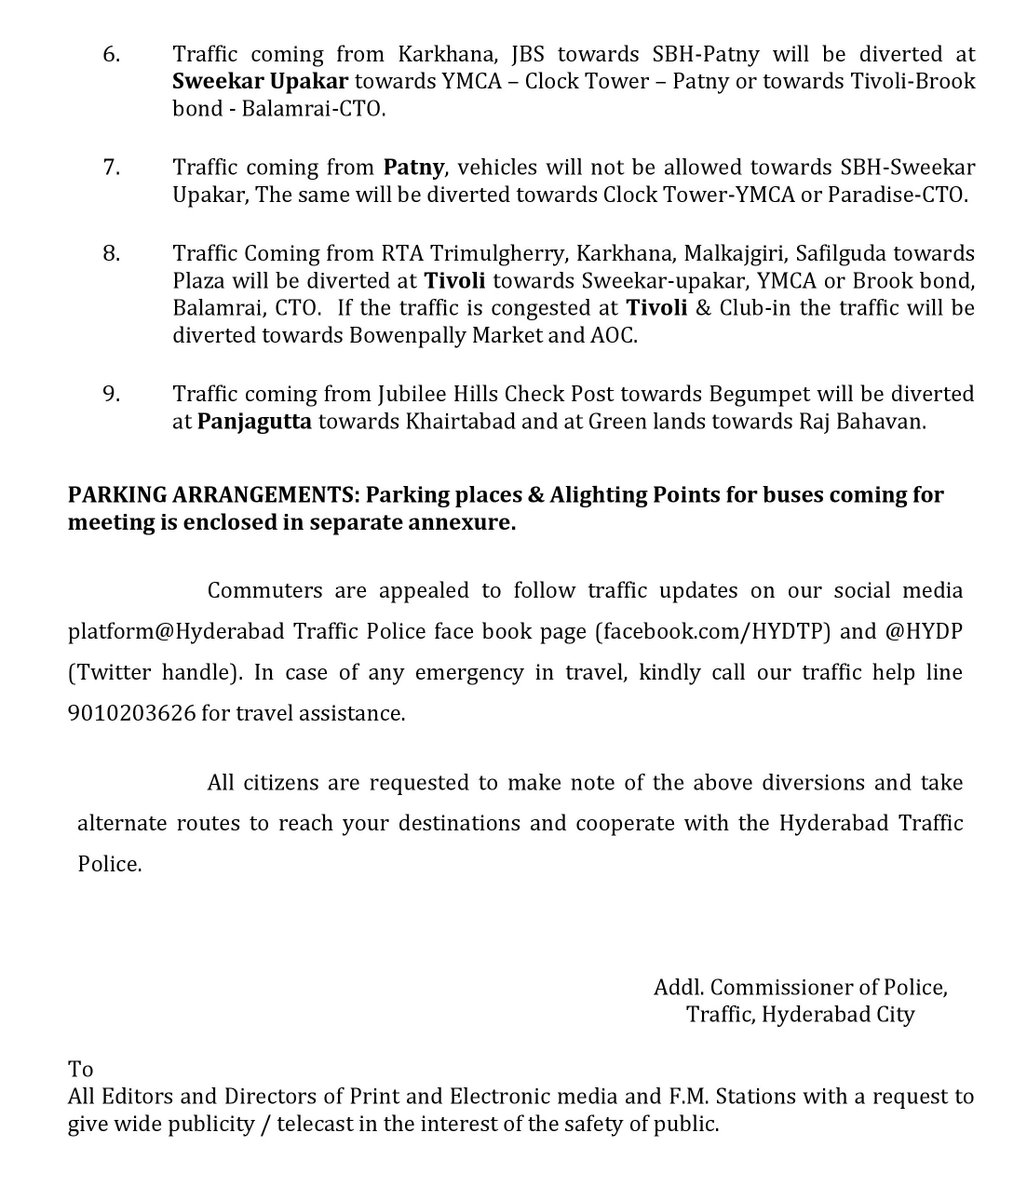 #HYDTPinfo #TrafficAlert 
Commuters, please make a note of #TrafficAdvisory in connection with the Public meeting by HON’BLE UNION MINISTER OF HOME AFFAIRS at Parade Grounds, Sec-bad on 05-05-2024 from 1700 hrs to 2100 hrs.
#TrafficRestrictions #Diversions